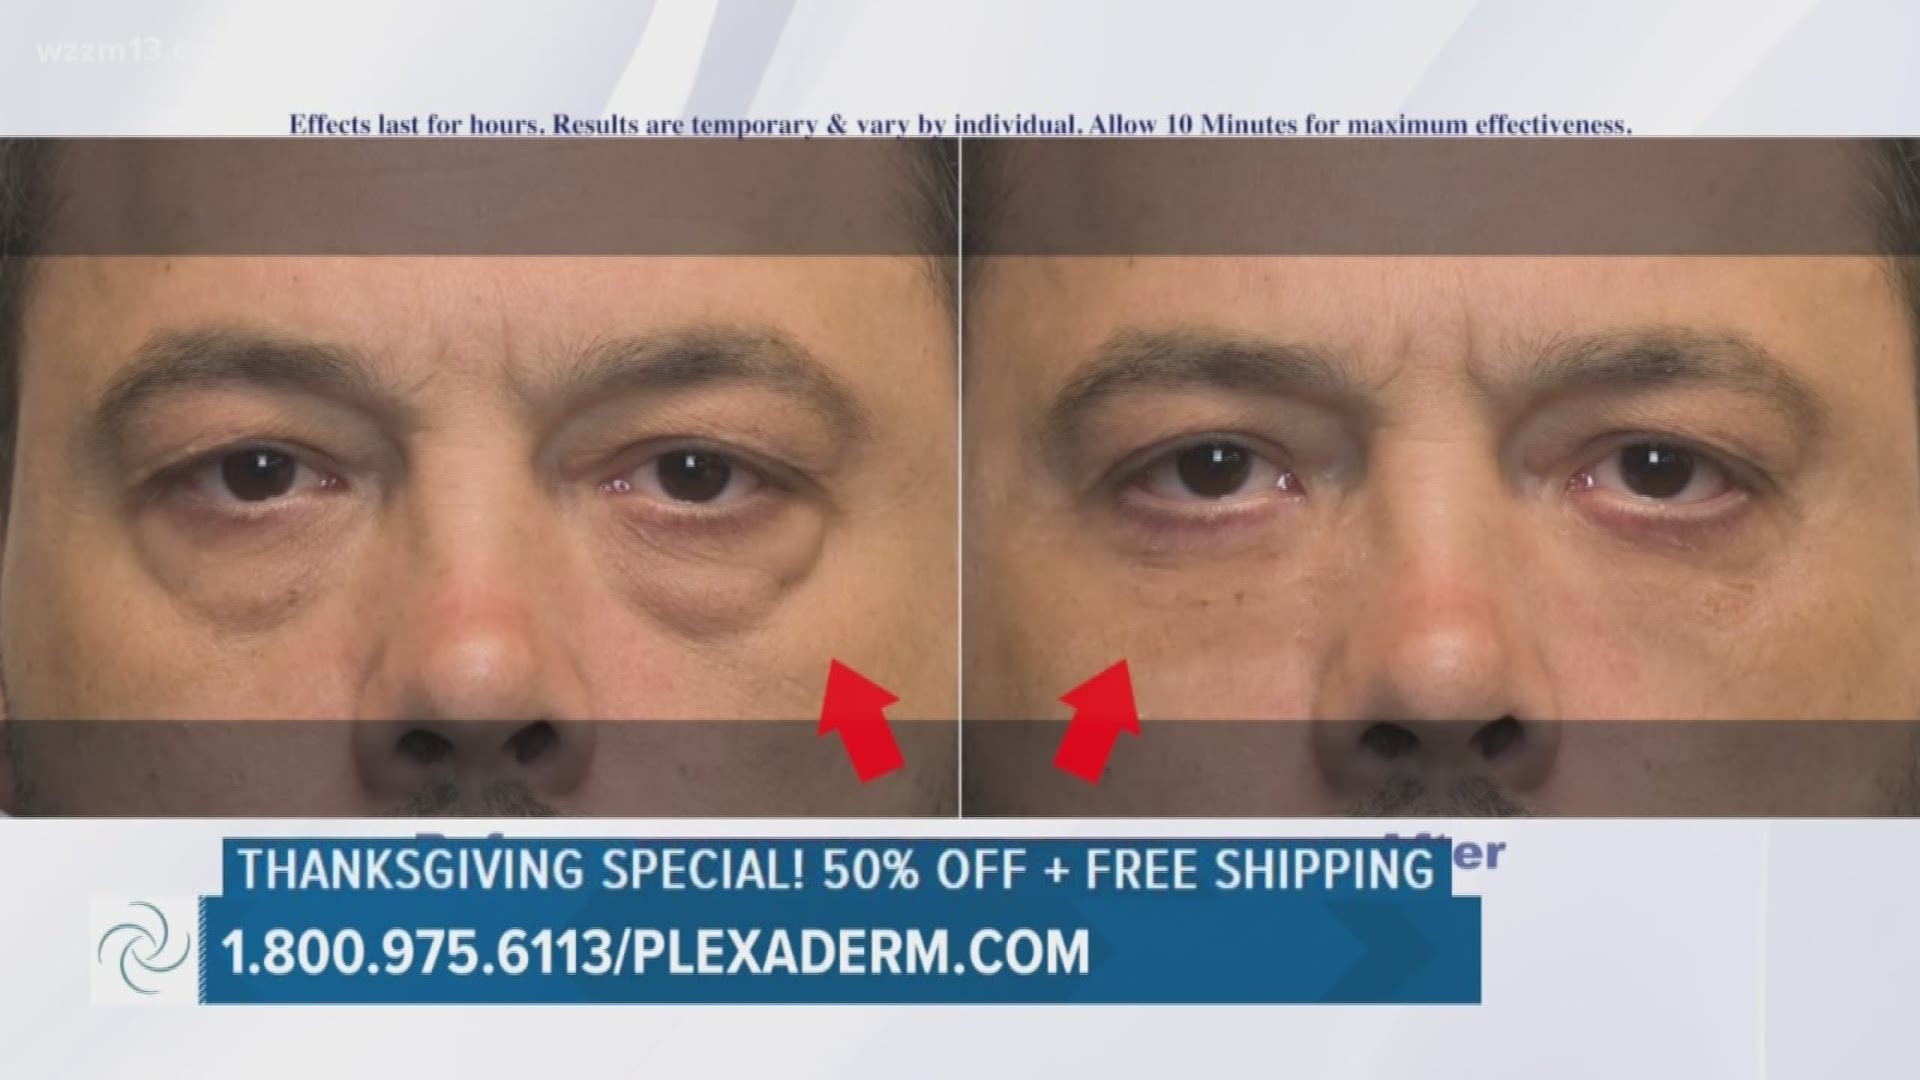 Reduce the signs of aging in just a few minutes with Plexaderm.